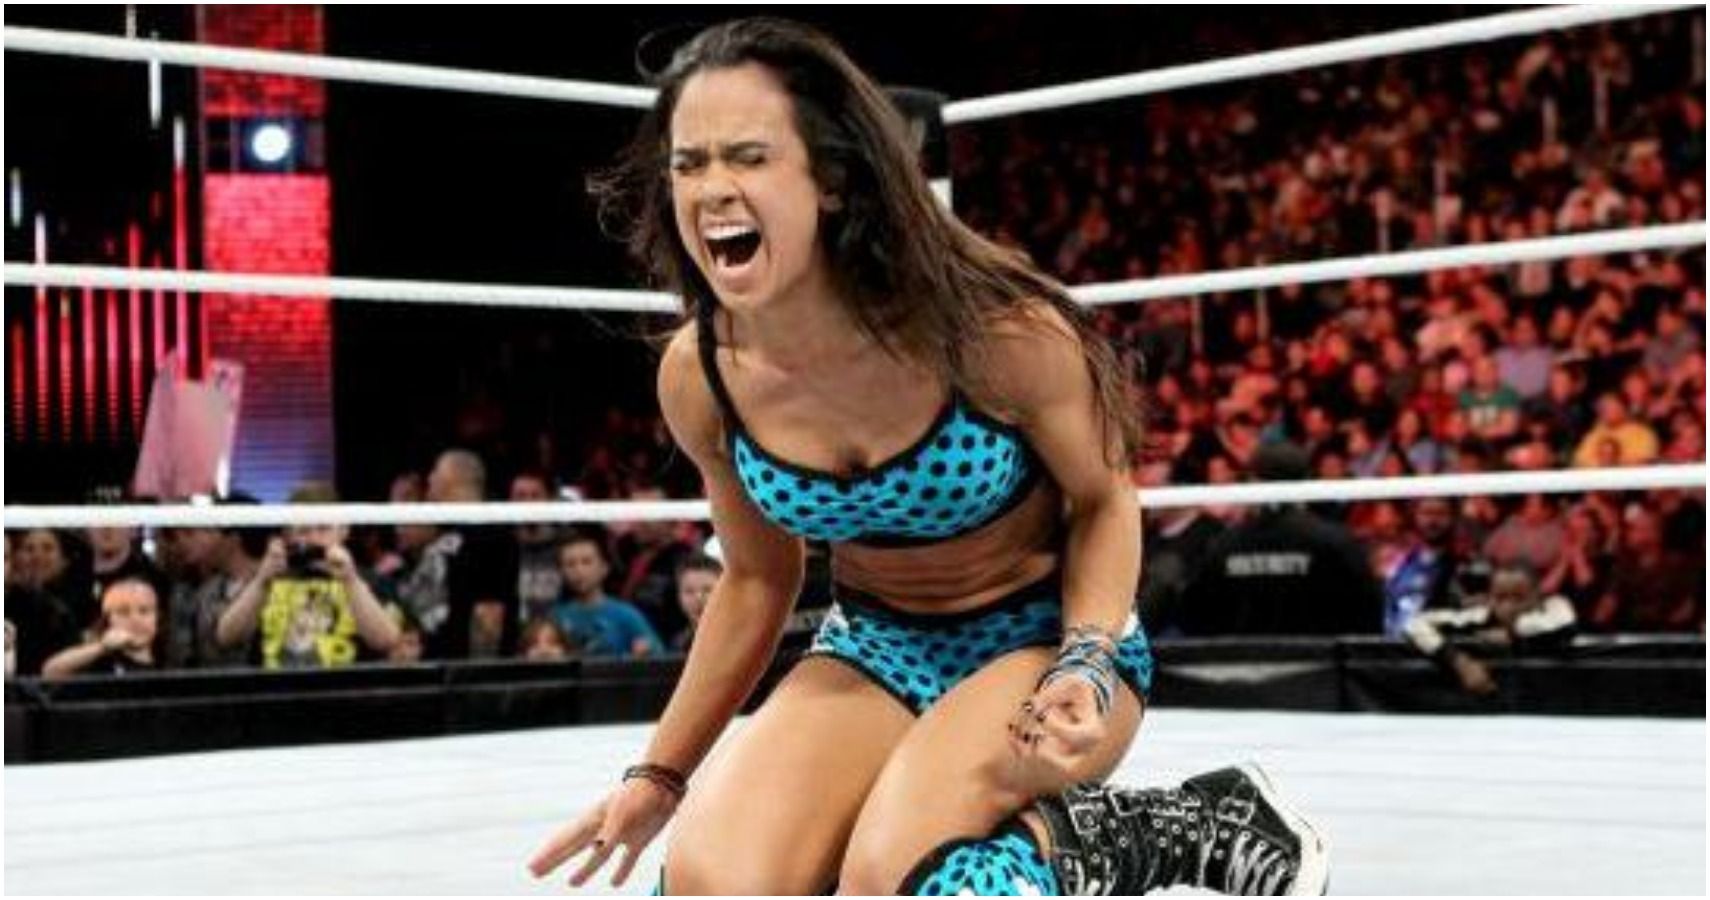 10 Things About AJ Lee That Would Never Fly Today